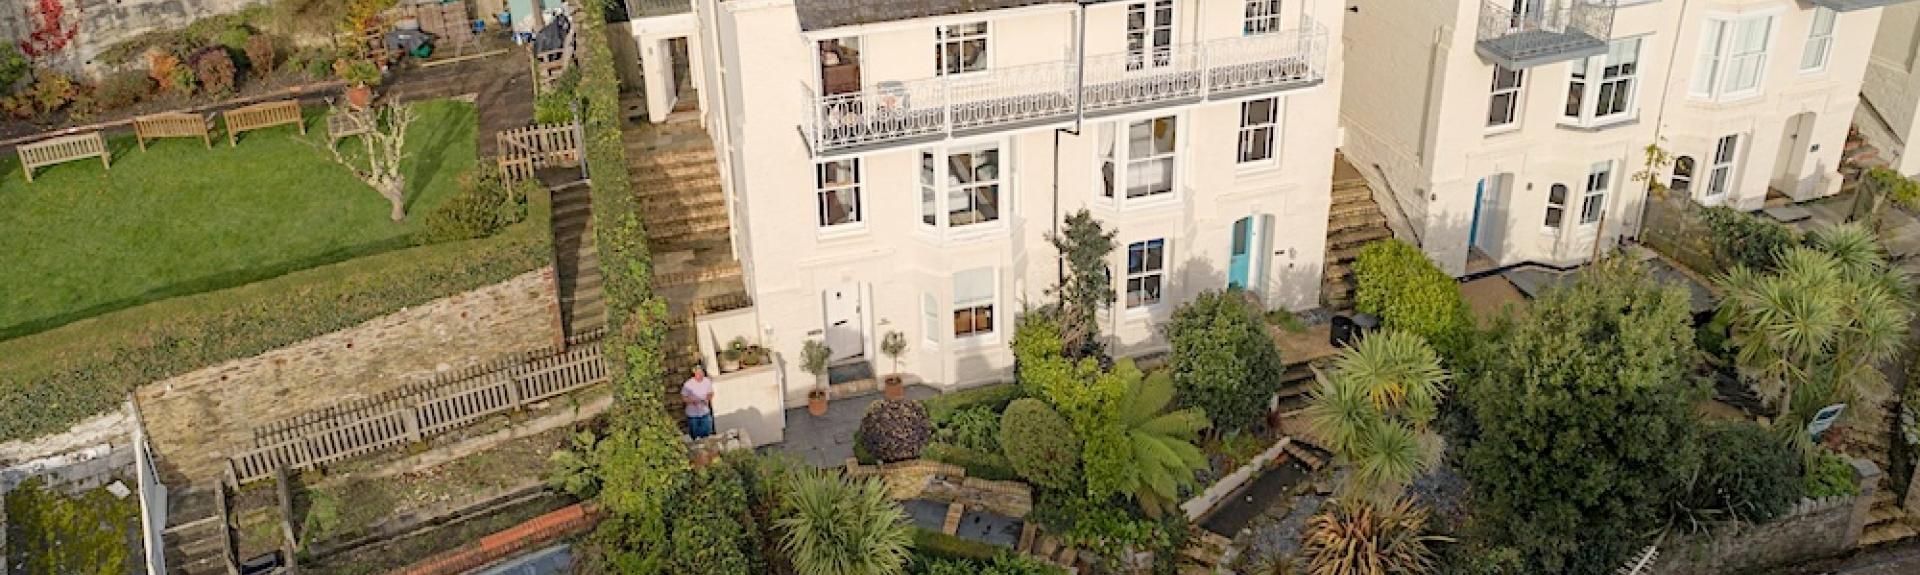 A semi-detached, 4-storey holiday home with a full-width shaded balcony overlooks the waterside.